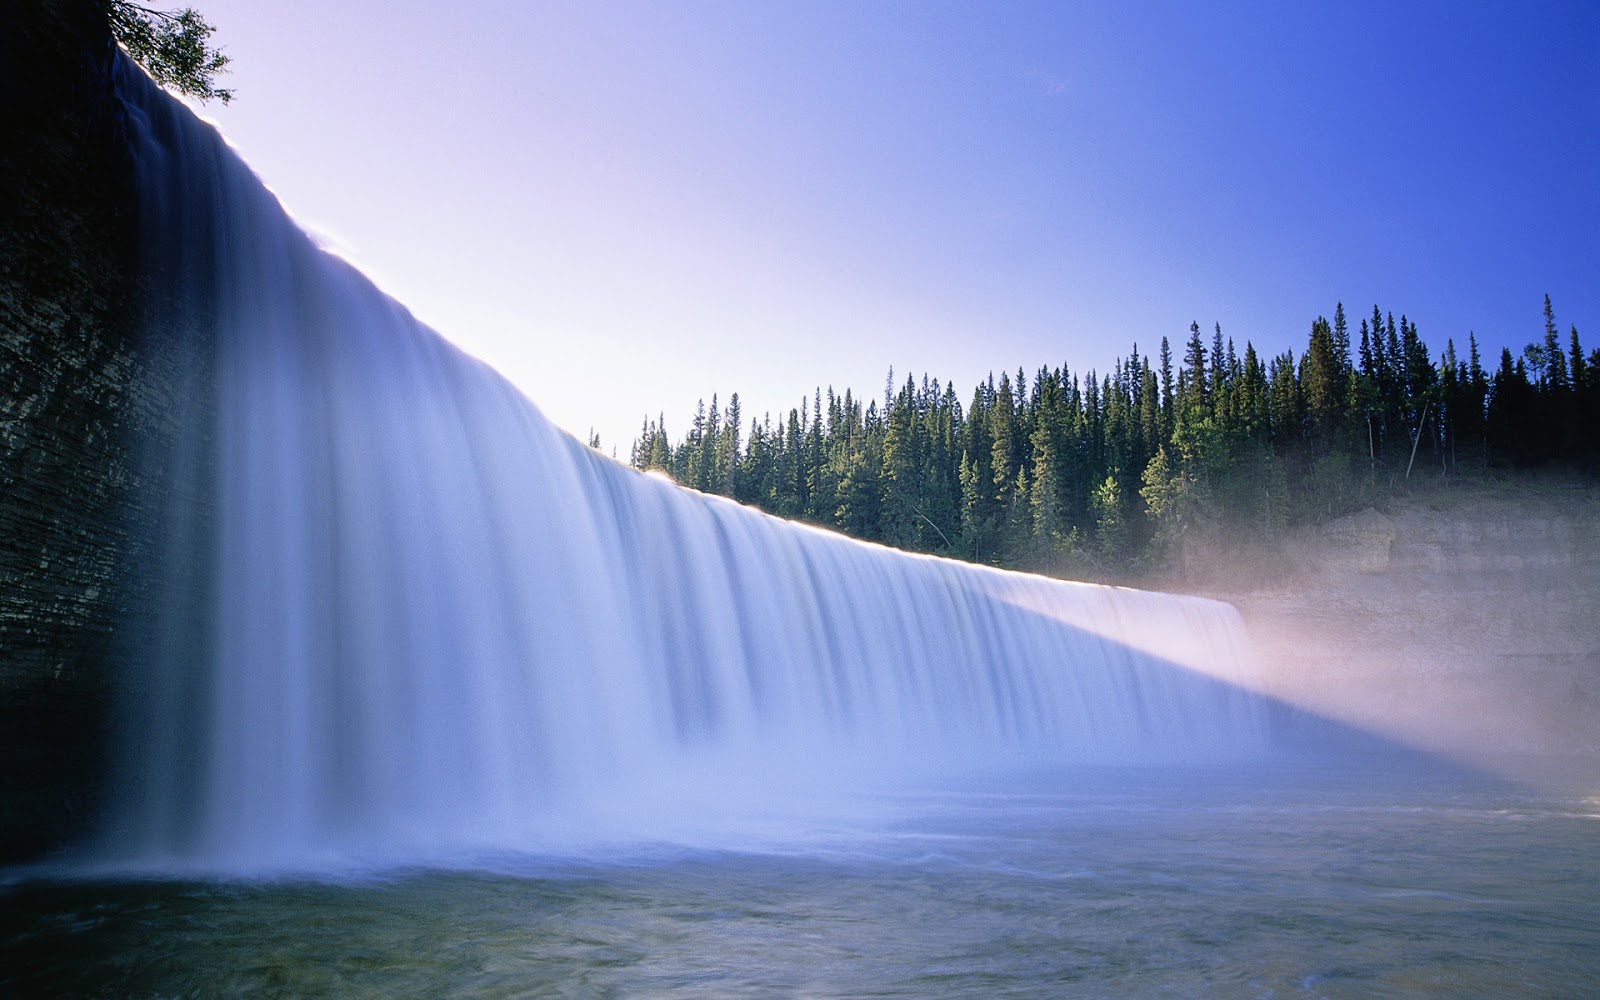 water flow wallpaper,body of water,water resources,nature,waterfall,water